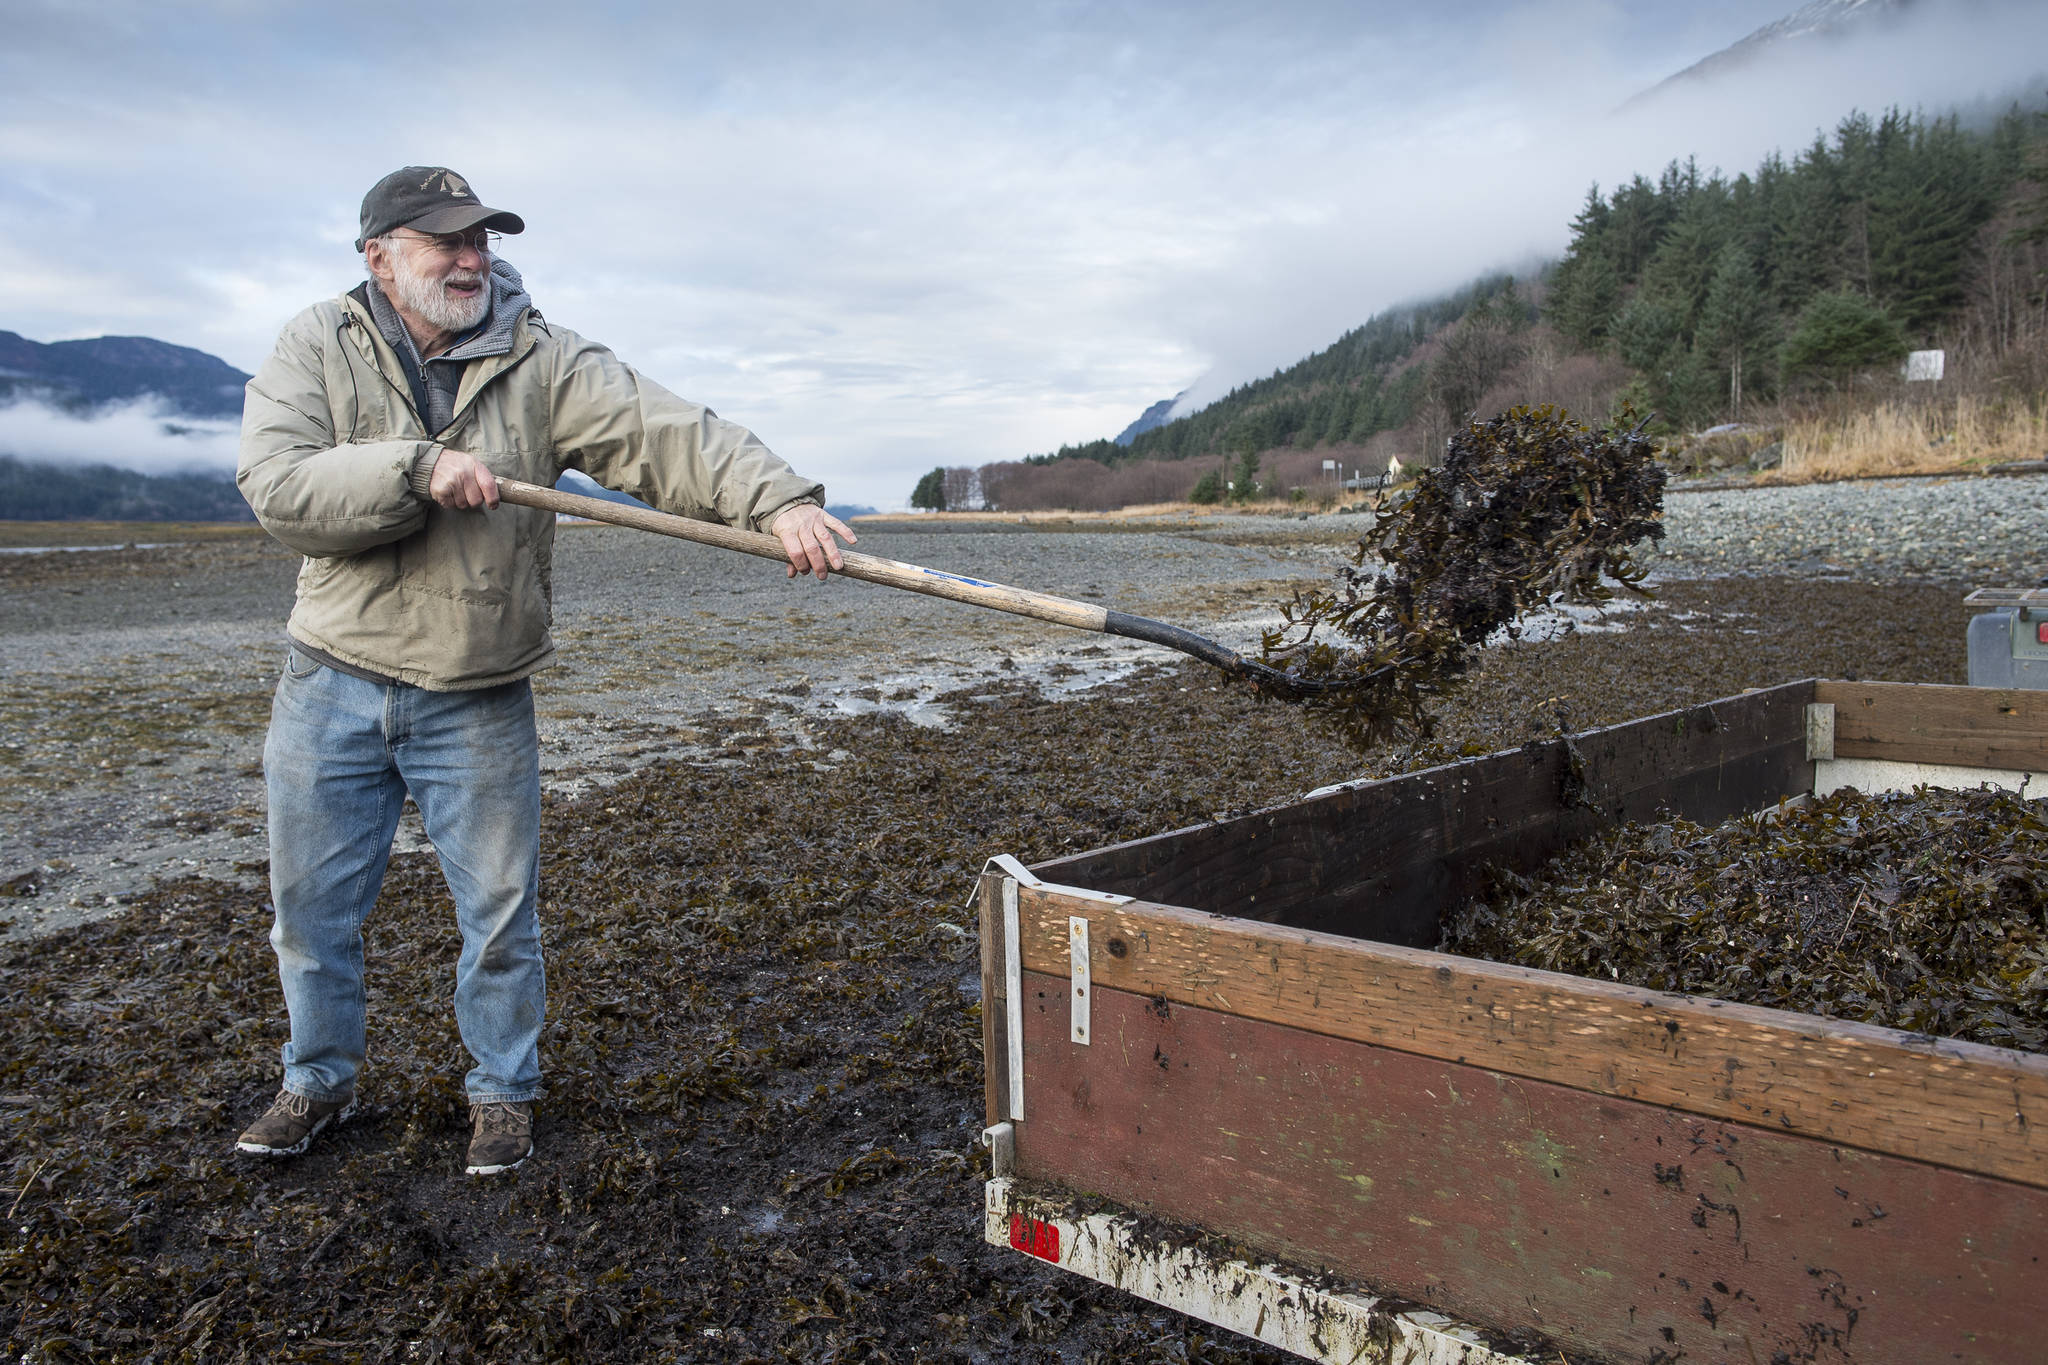 Steve Behnke collects seaweed for his Thane home garden at Sheep Creek on Tuesday, Nov. 27, 2018. Behnke said he uses the seaweed as a mulch and fertilizer for his vegetable garden. (Michael Penn | Juneau Empire)